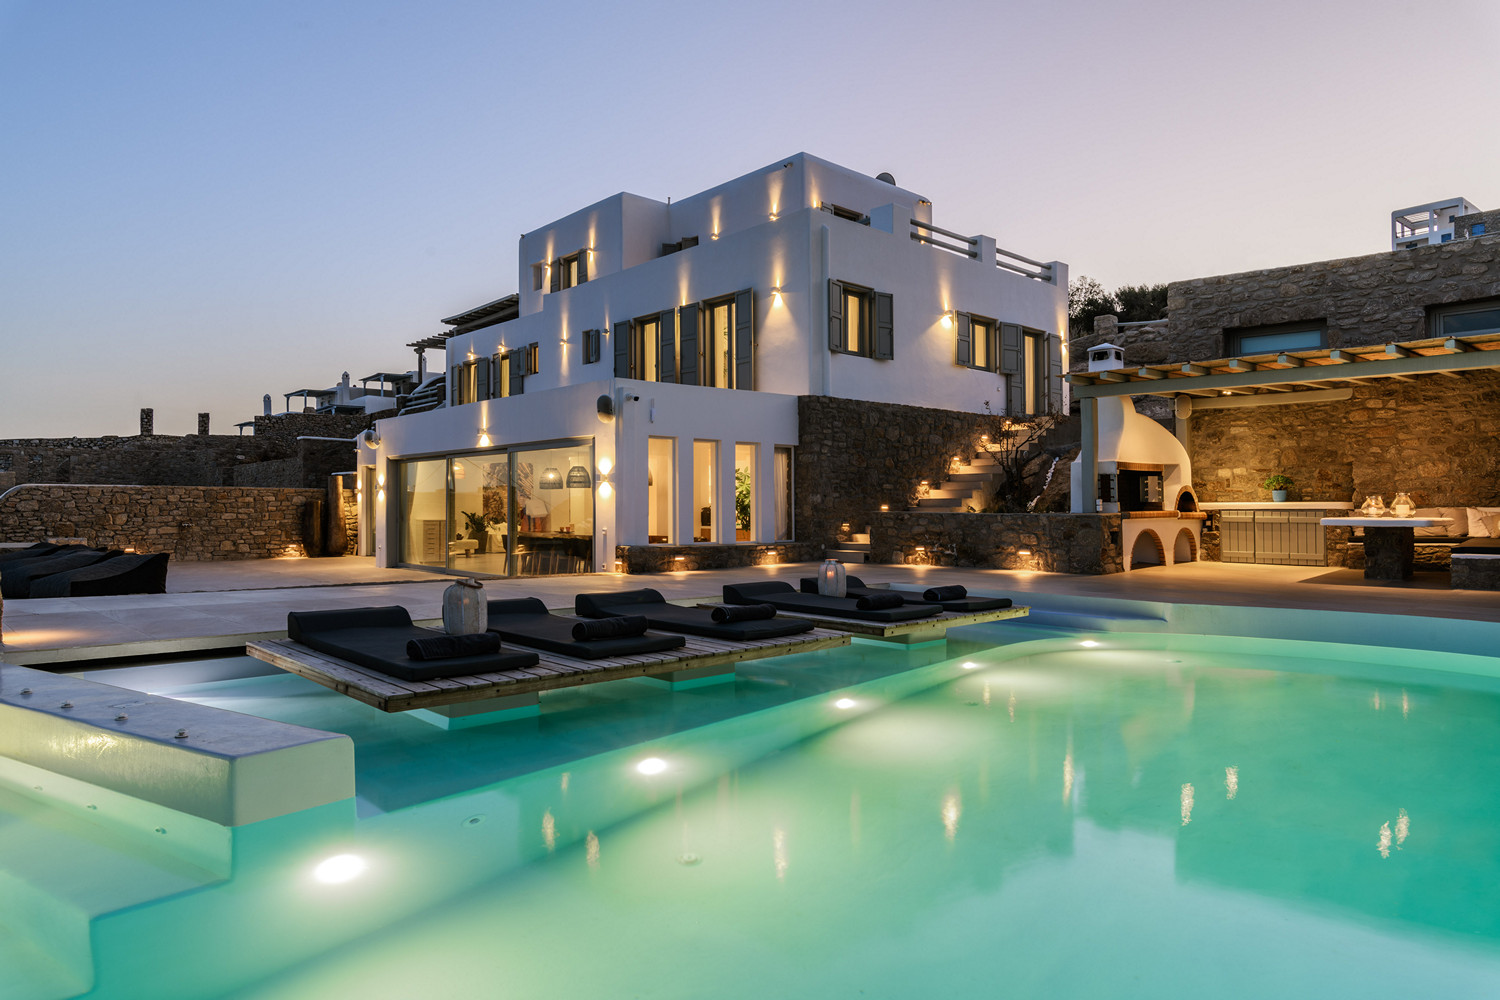 A Mykonos villa with a private pool